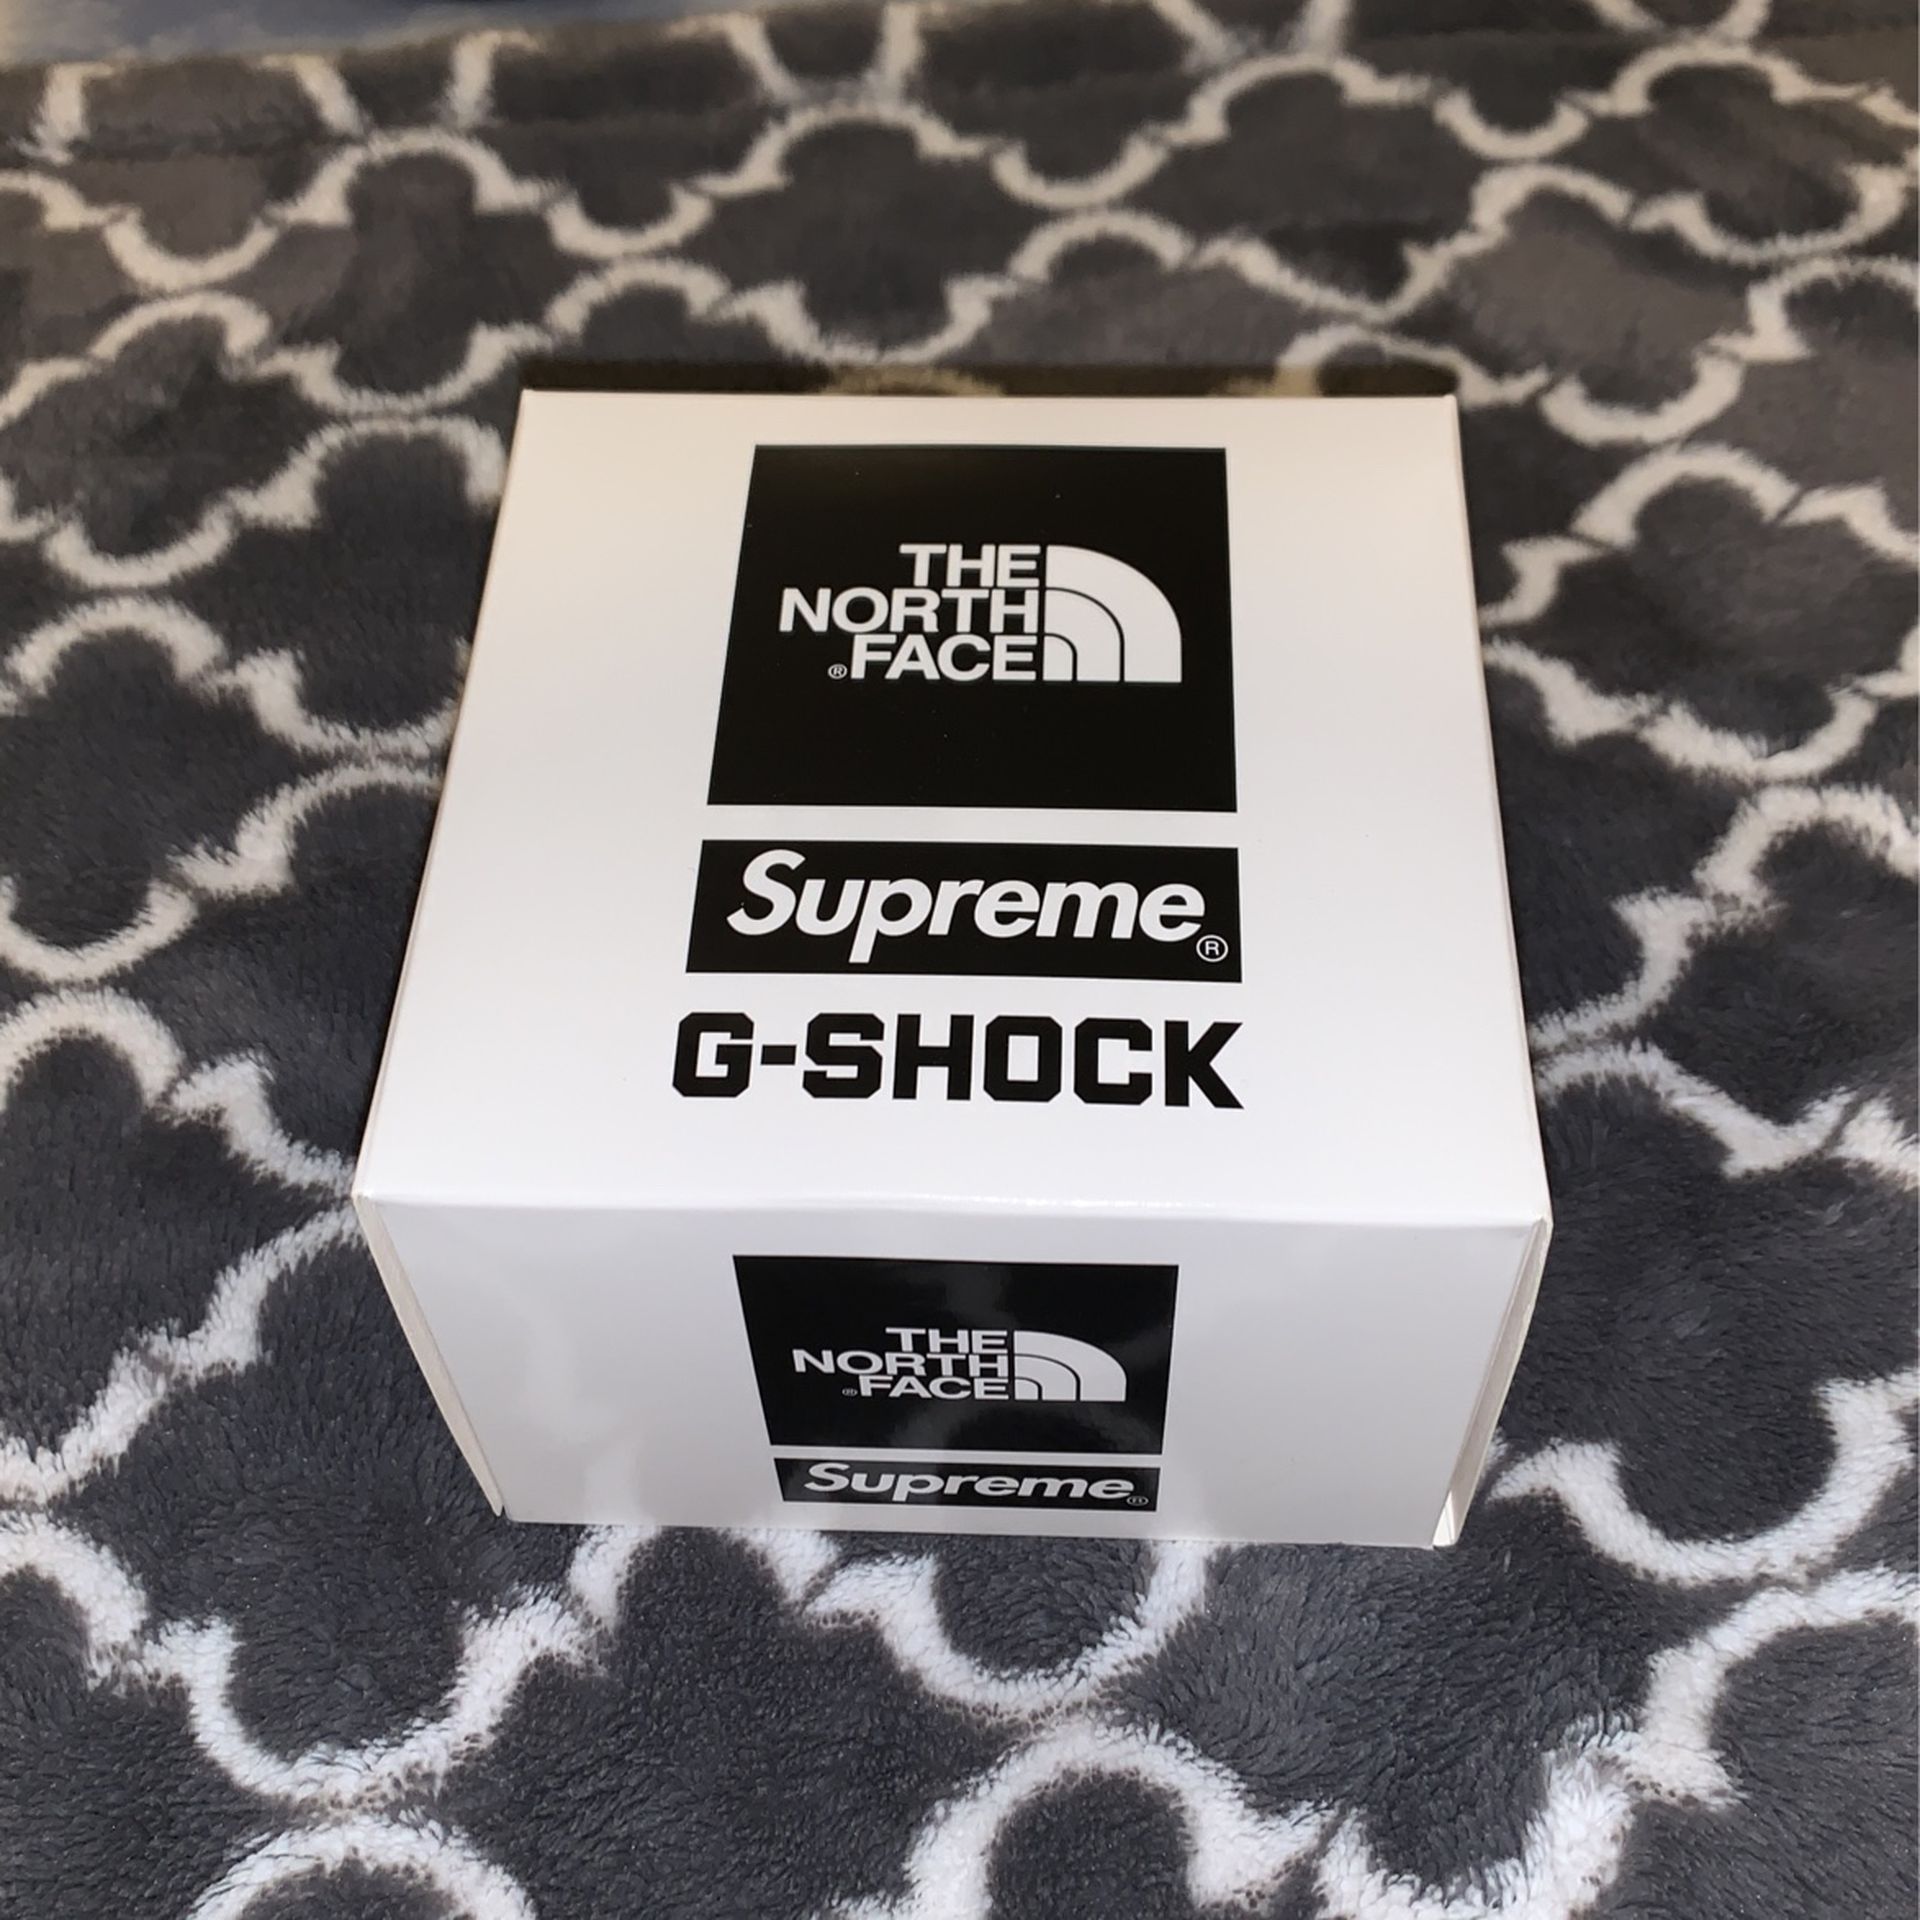 G-shock Supreme The North Face 